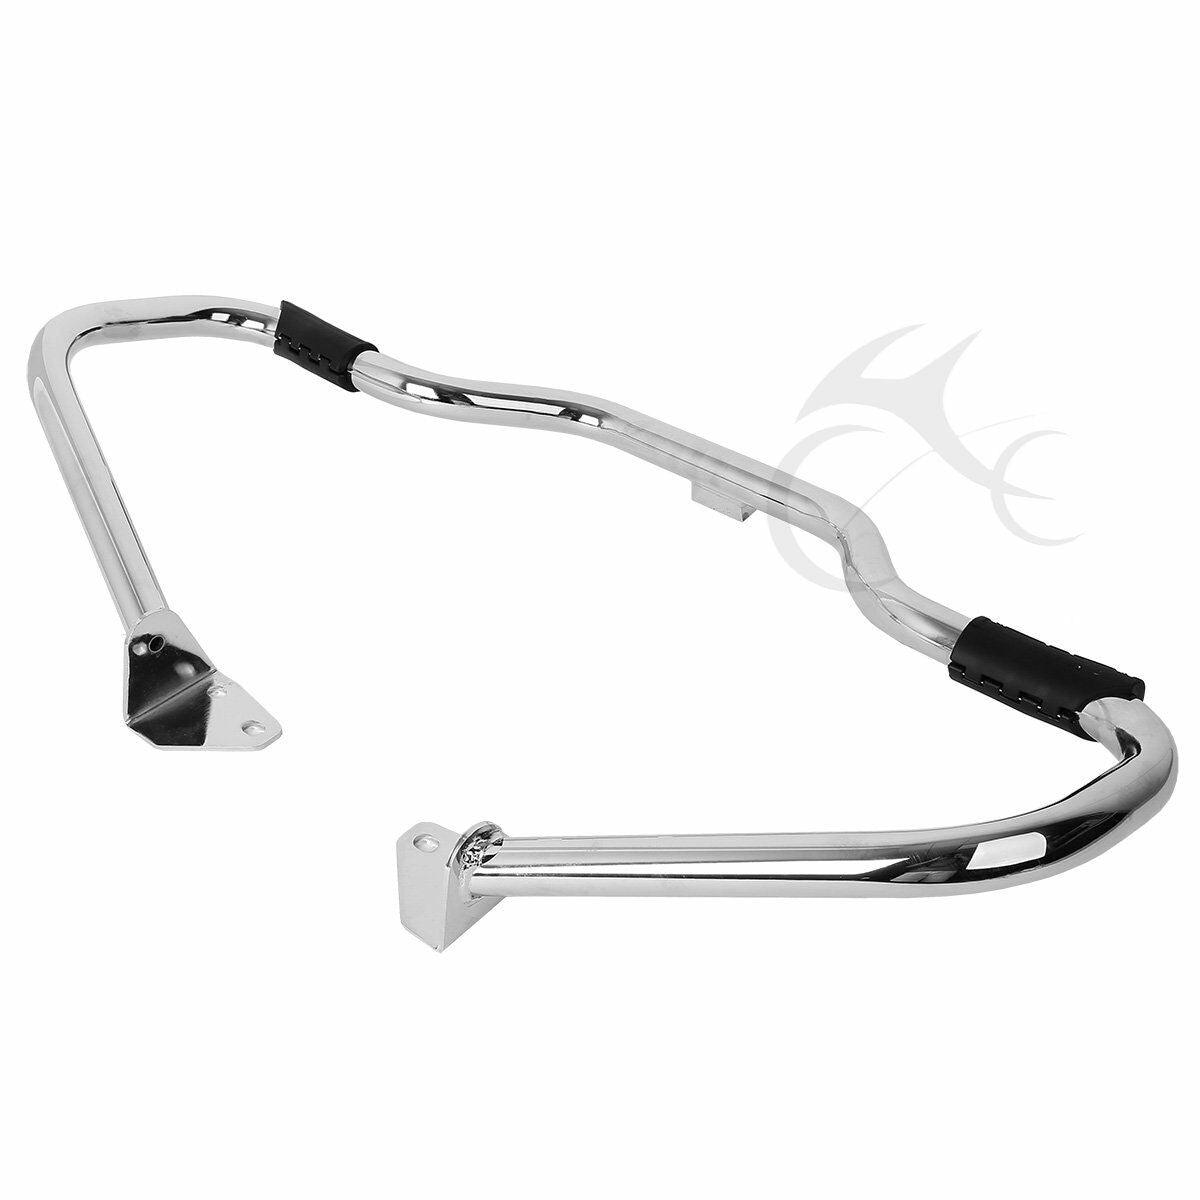 Chrome 1.25" Mustache Engine Guard Highway Crash Bar Fit For Harley Dyna 06-17 - Moto Life Products